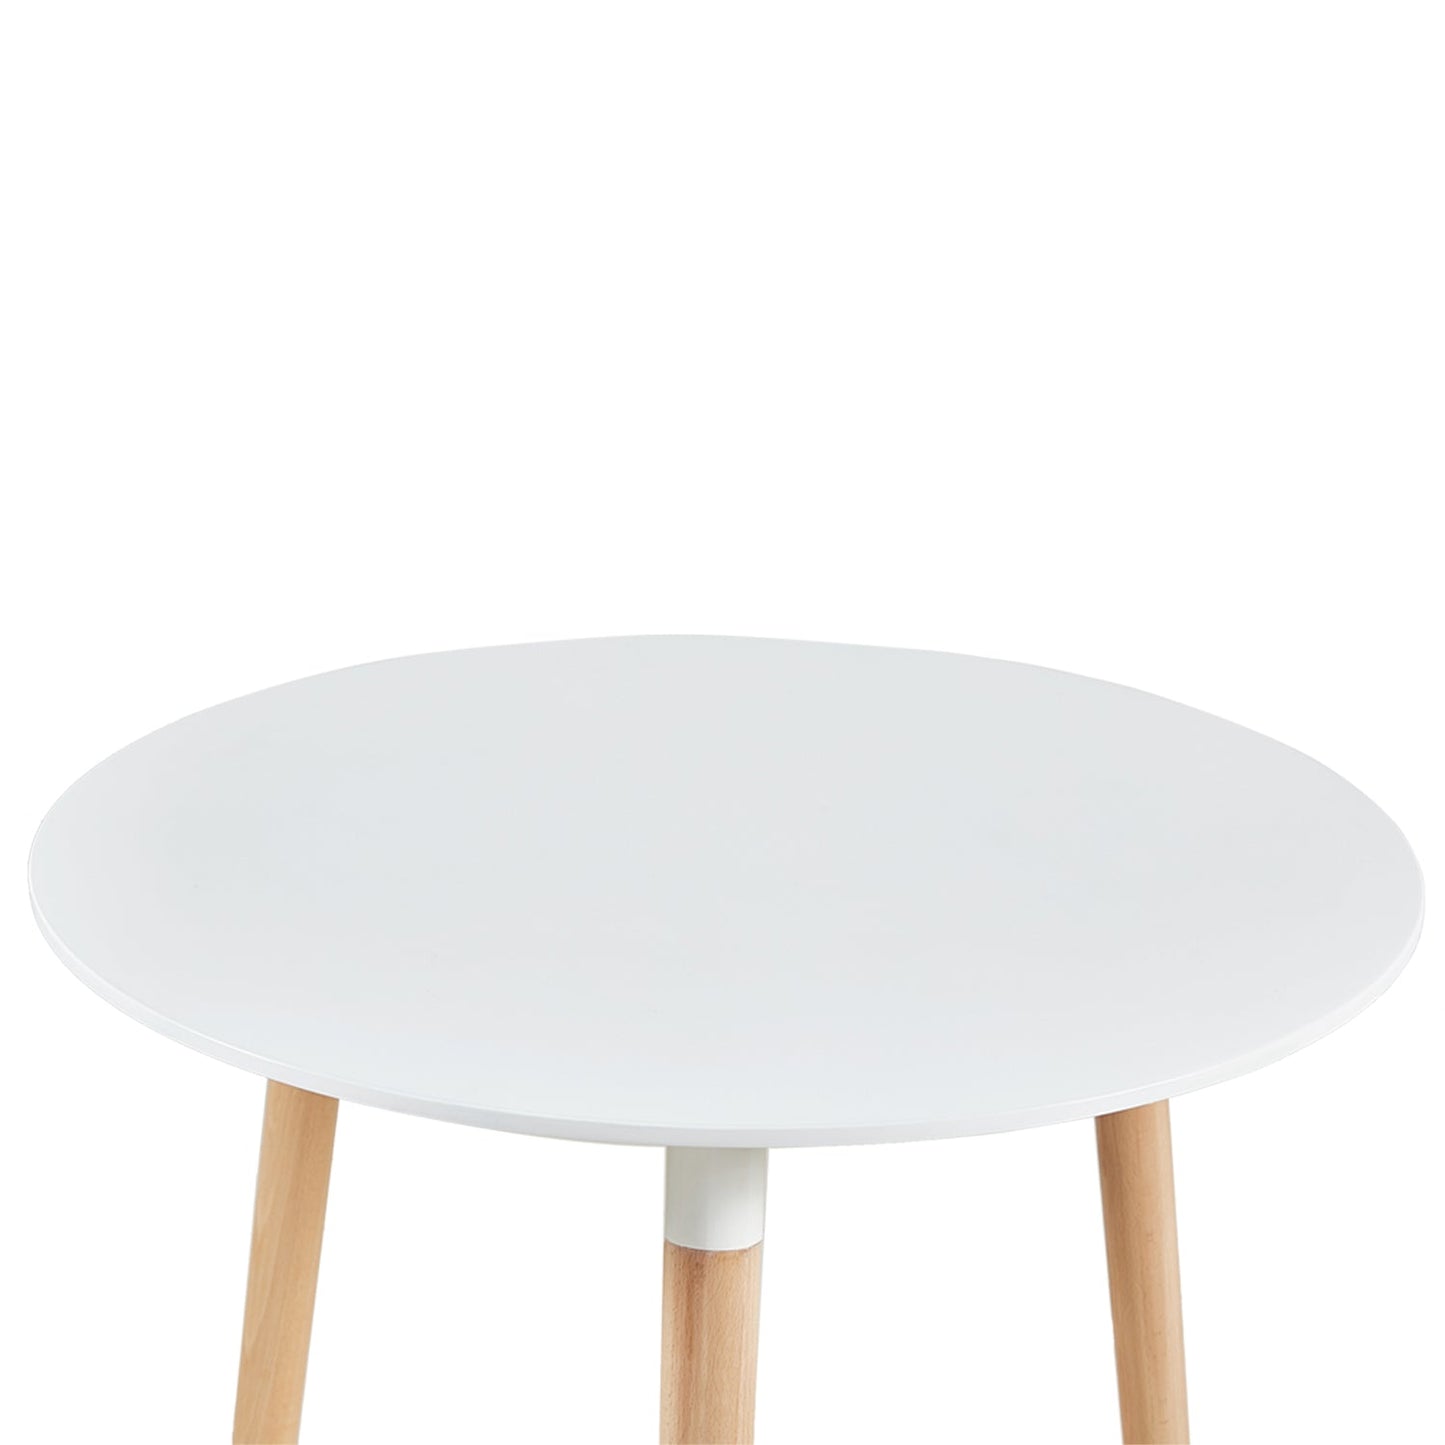 PEA Round MDF Dining Tables with 3 beech legs 80*80*74 cm - White